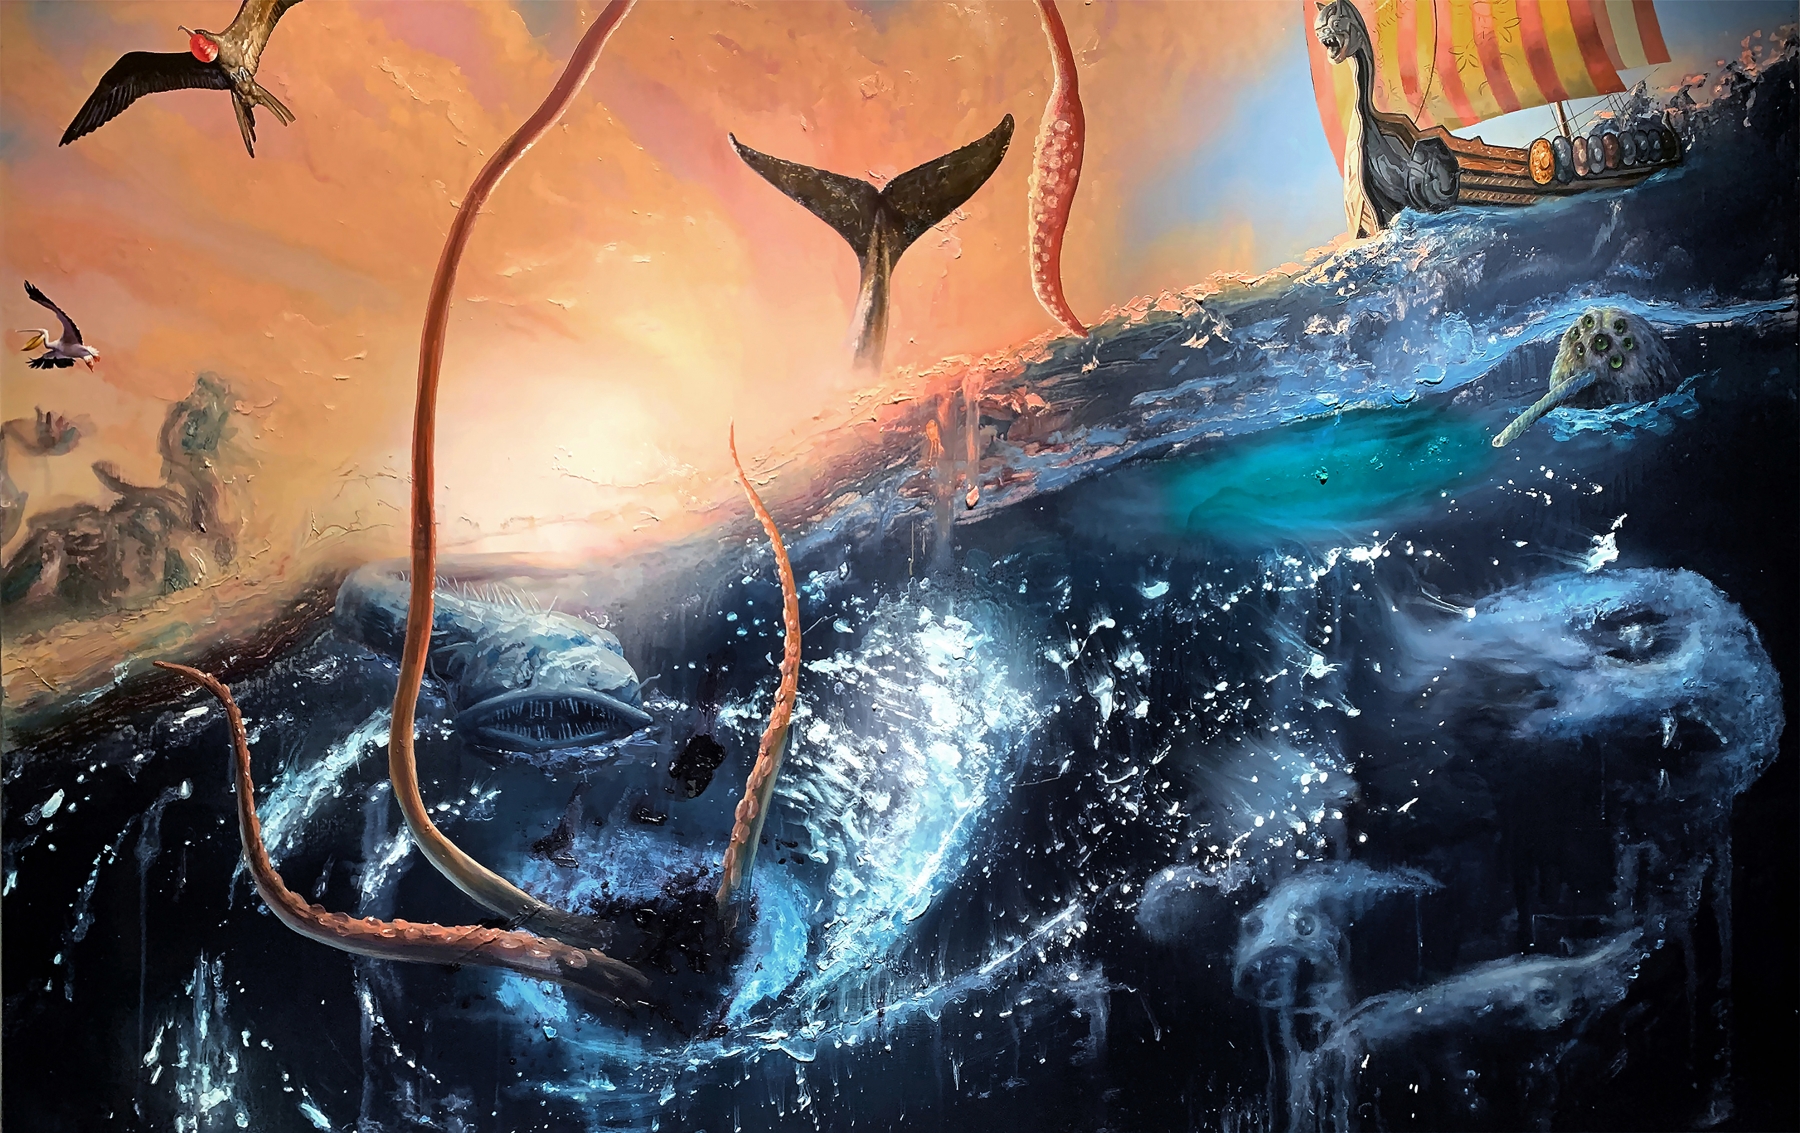 a kraken’s tentacles and a whale tail emerge from a turbulent sea and birds fly overhead as a viking ship approaches